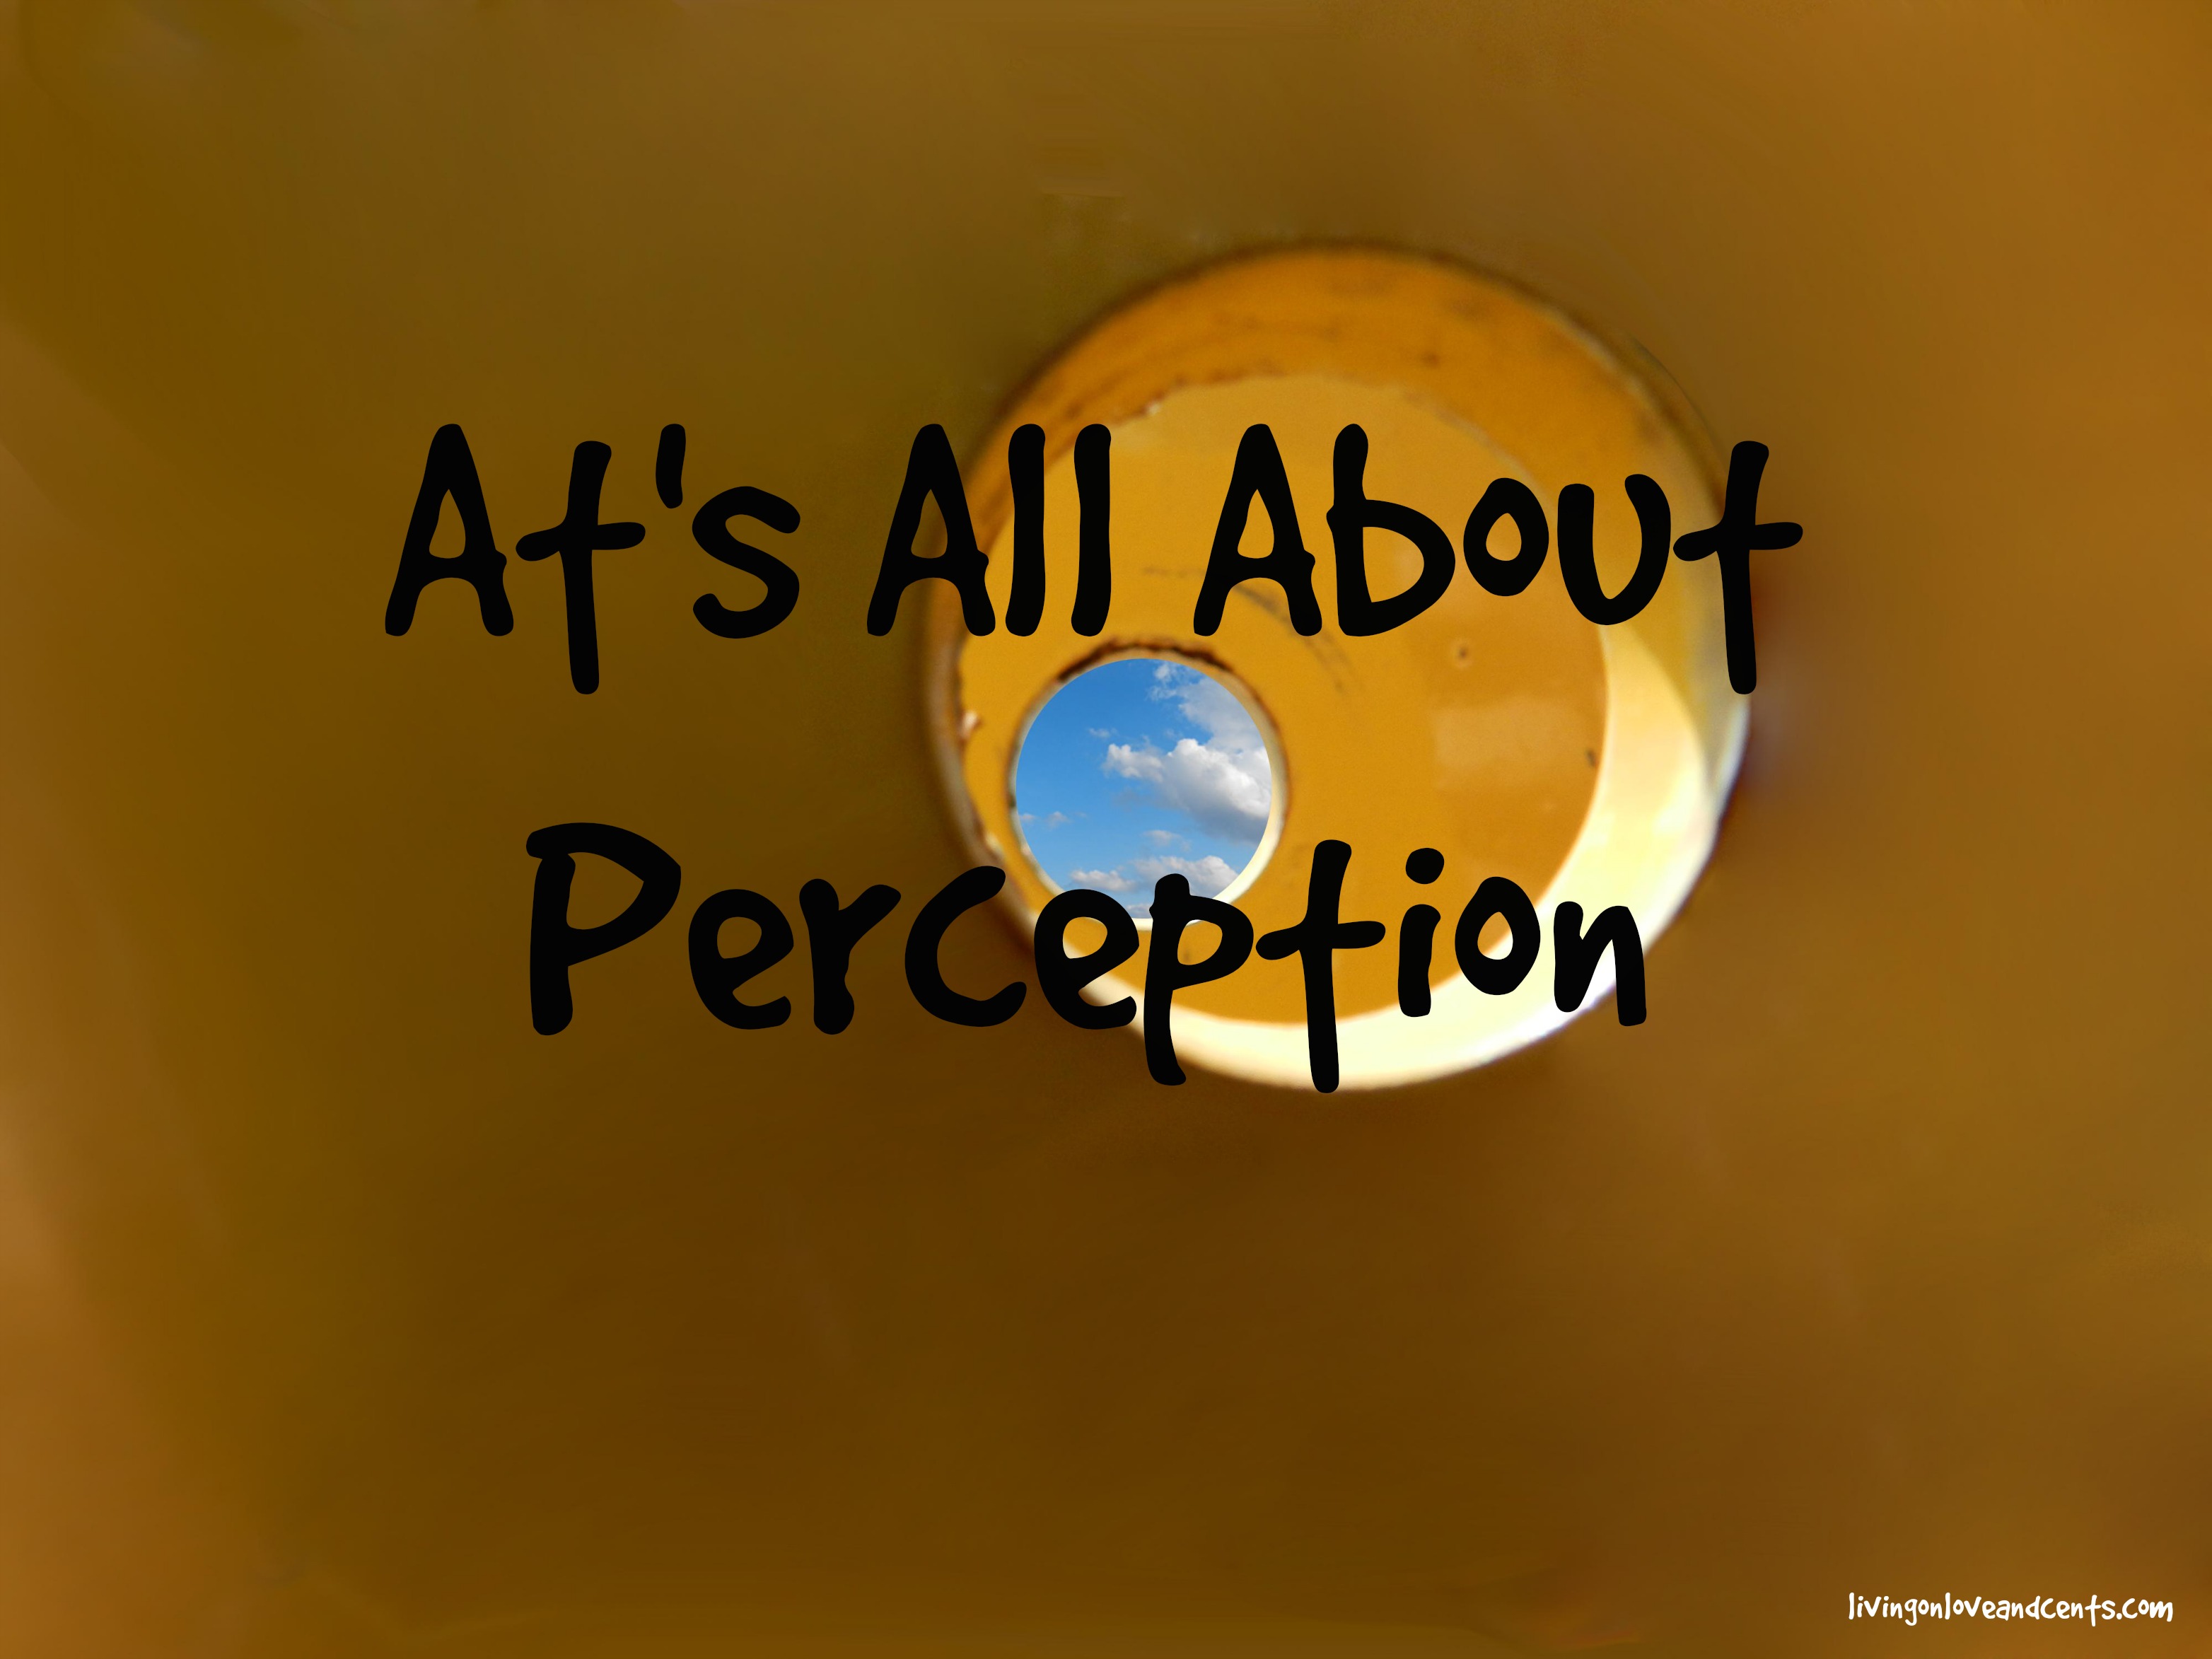 At's All About Perception